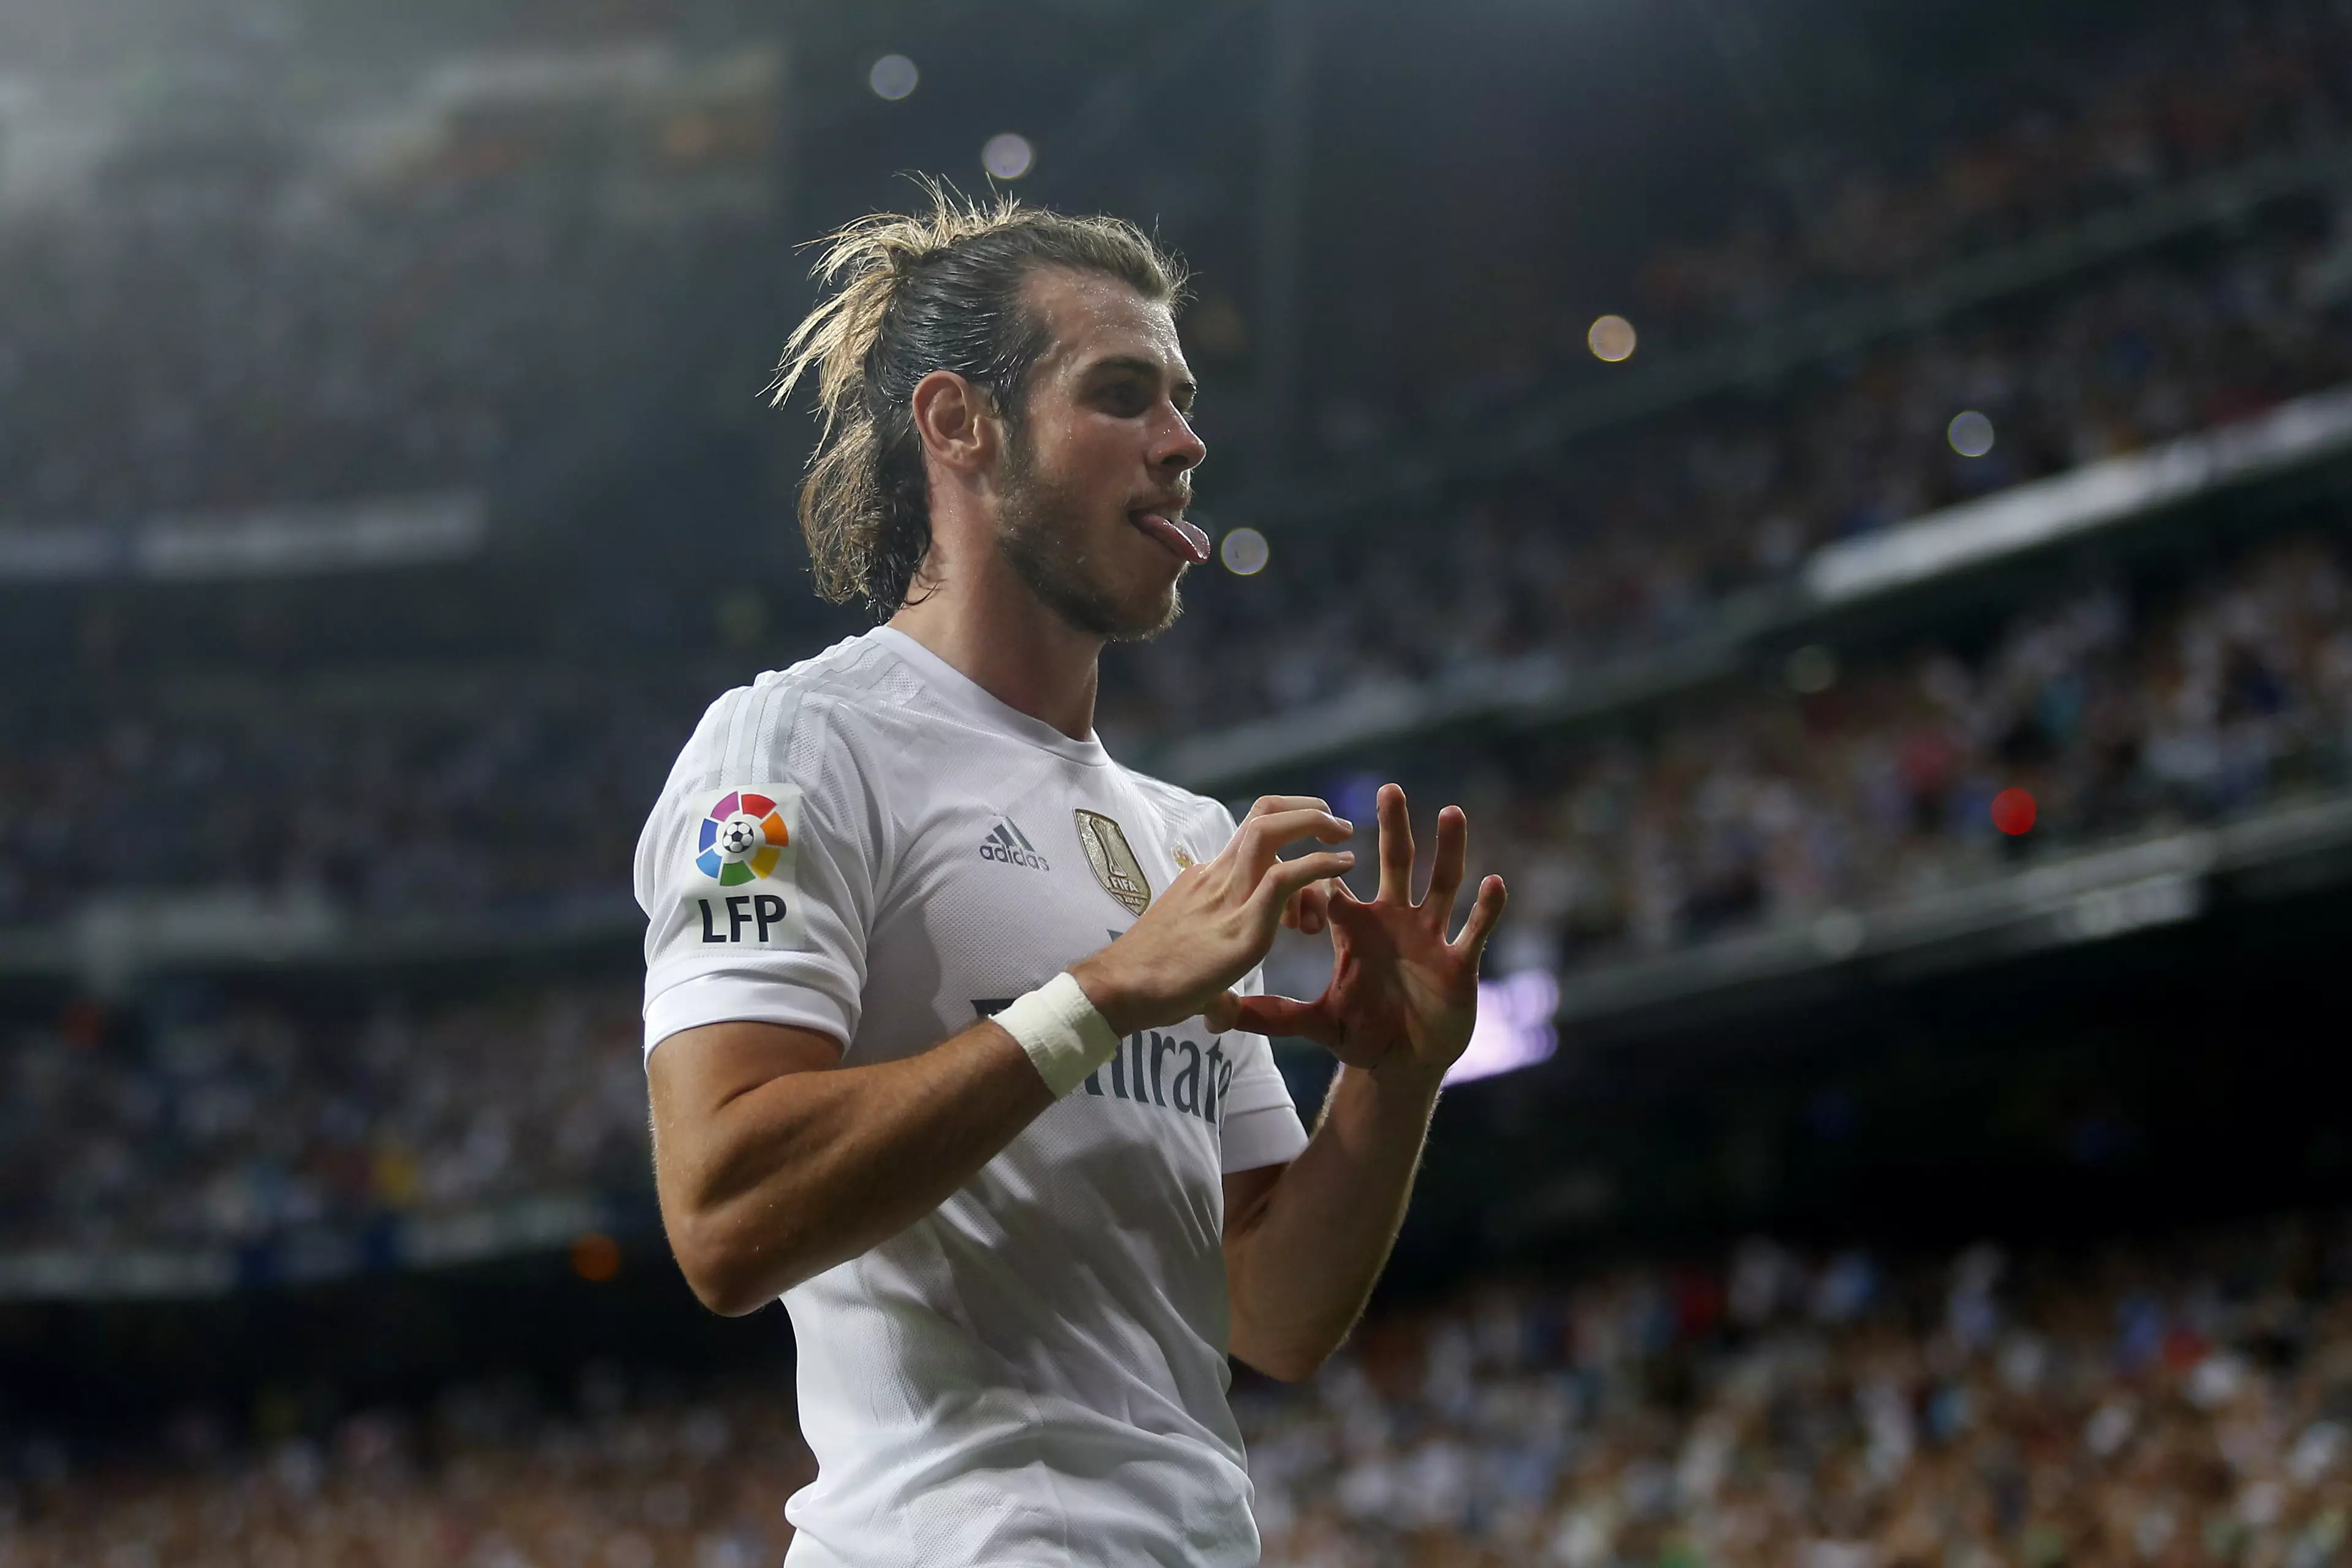 Liverpool tried to sign Bale in the summer. Image: PA Images